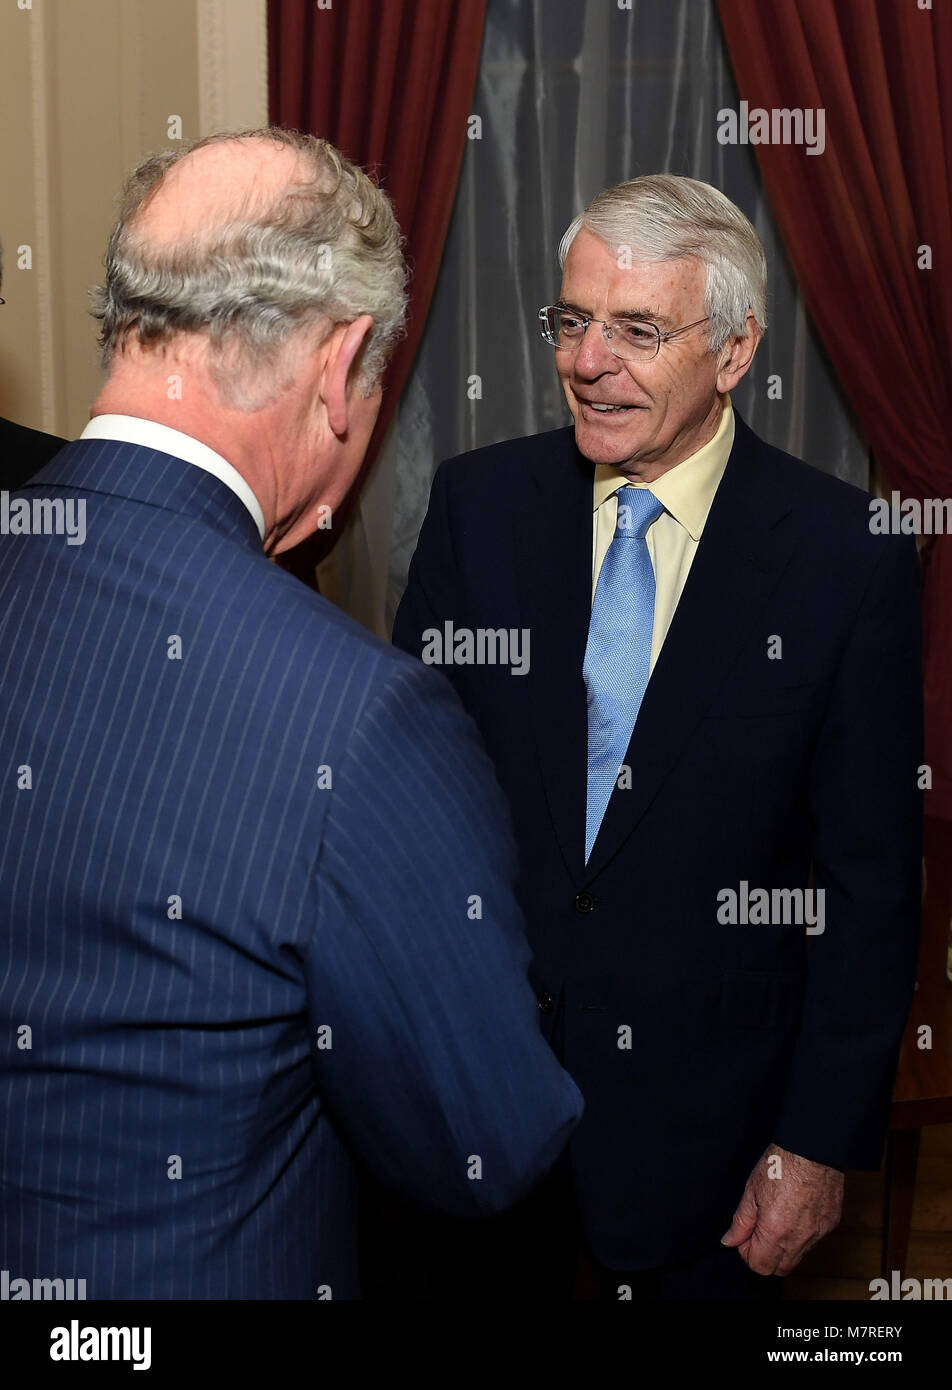 The Prince of Wales (left) talks to former Prime Minister John Major at a reception held by the Commonwealth Secretary-General, Rt Hon Patricia Scotland QC, at Marlborough House, the home of the Commonwealth Secretariat in London. Stock Photo